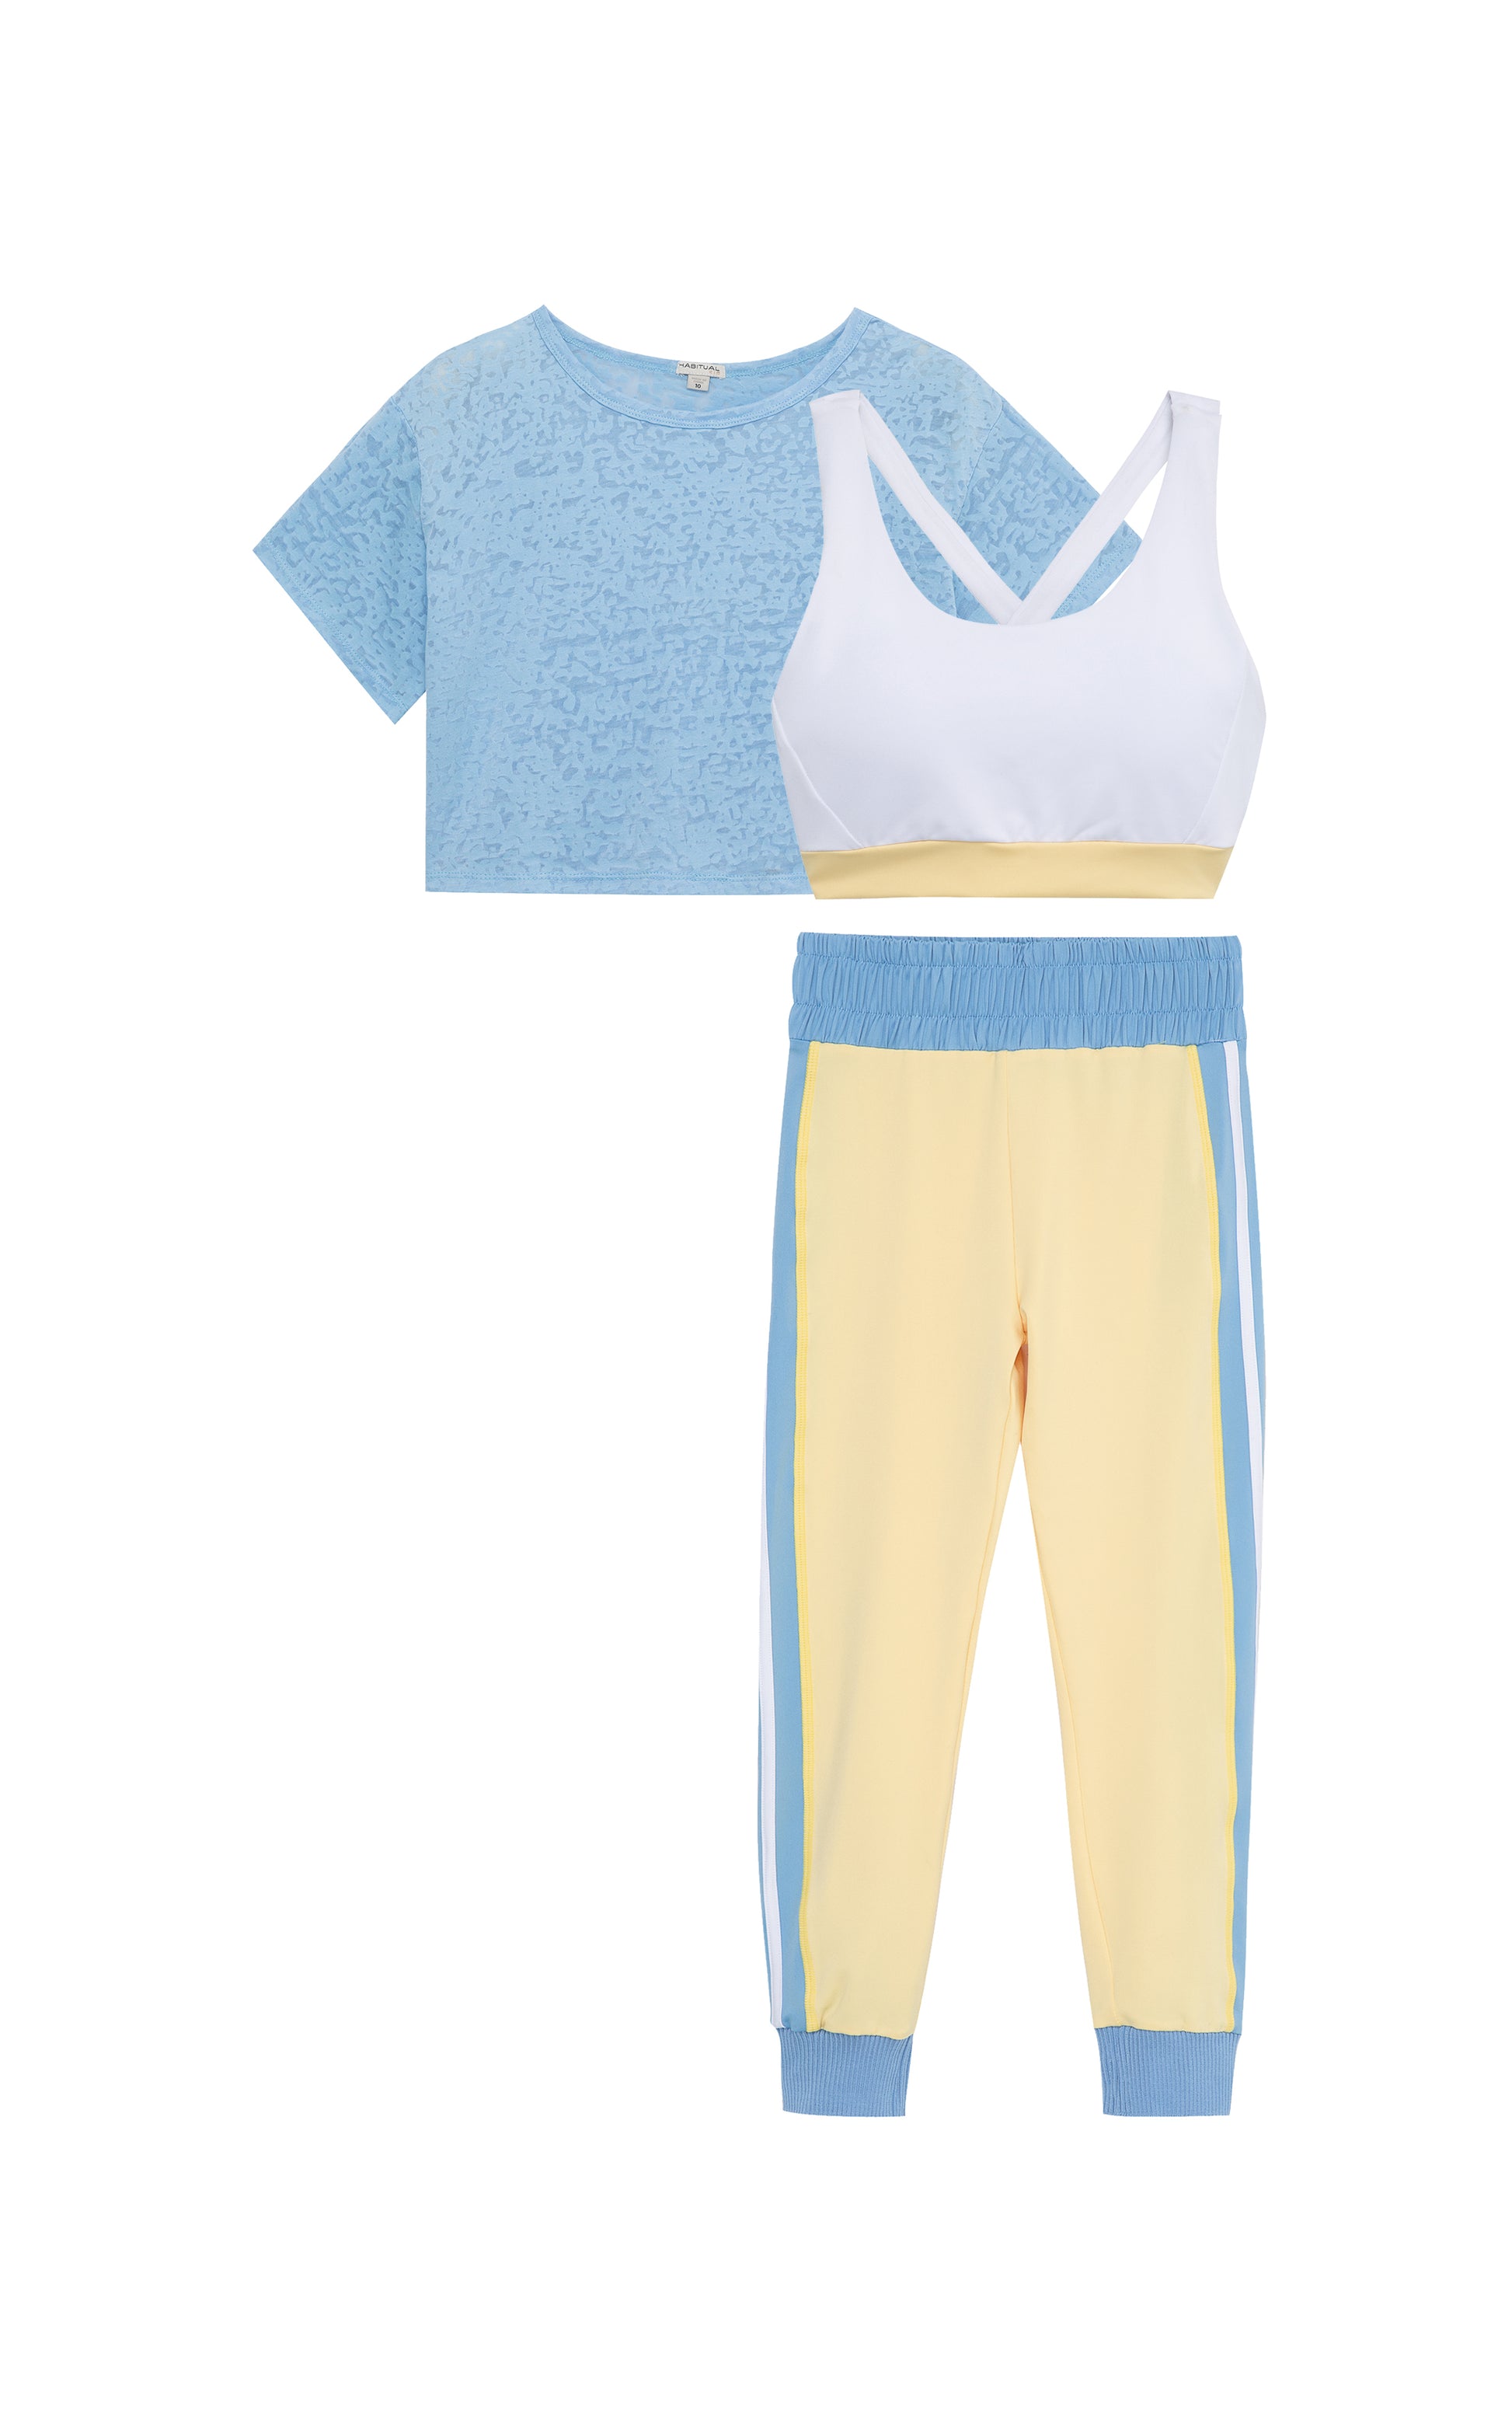 Three-piece active set including baby blue shirt, white tank top with yellow bottom trim, and baby-blue-and-yellow leggings with white stripes